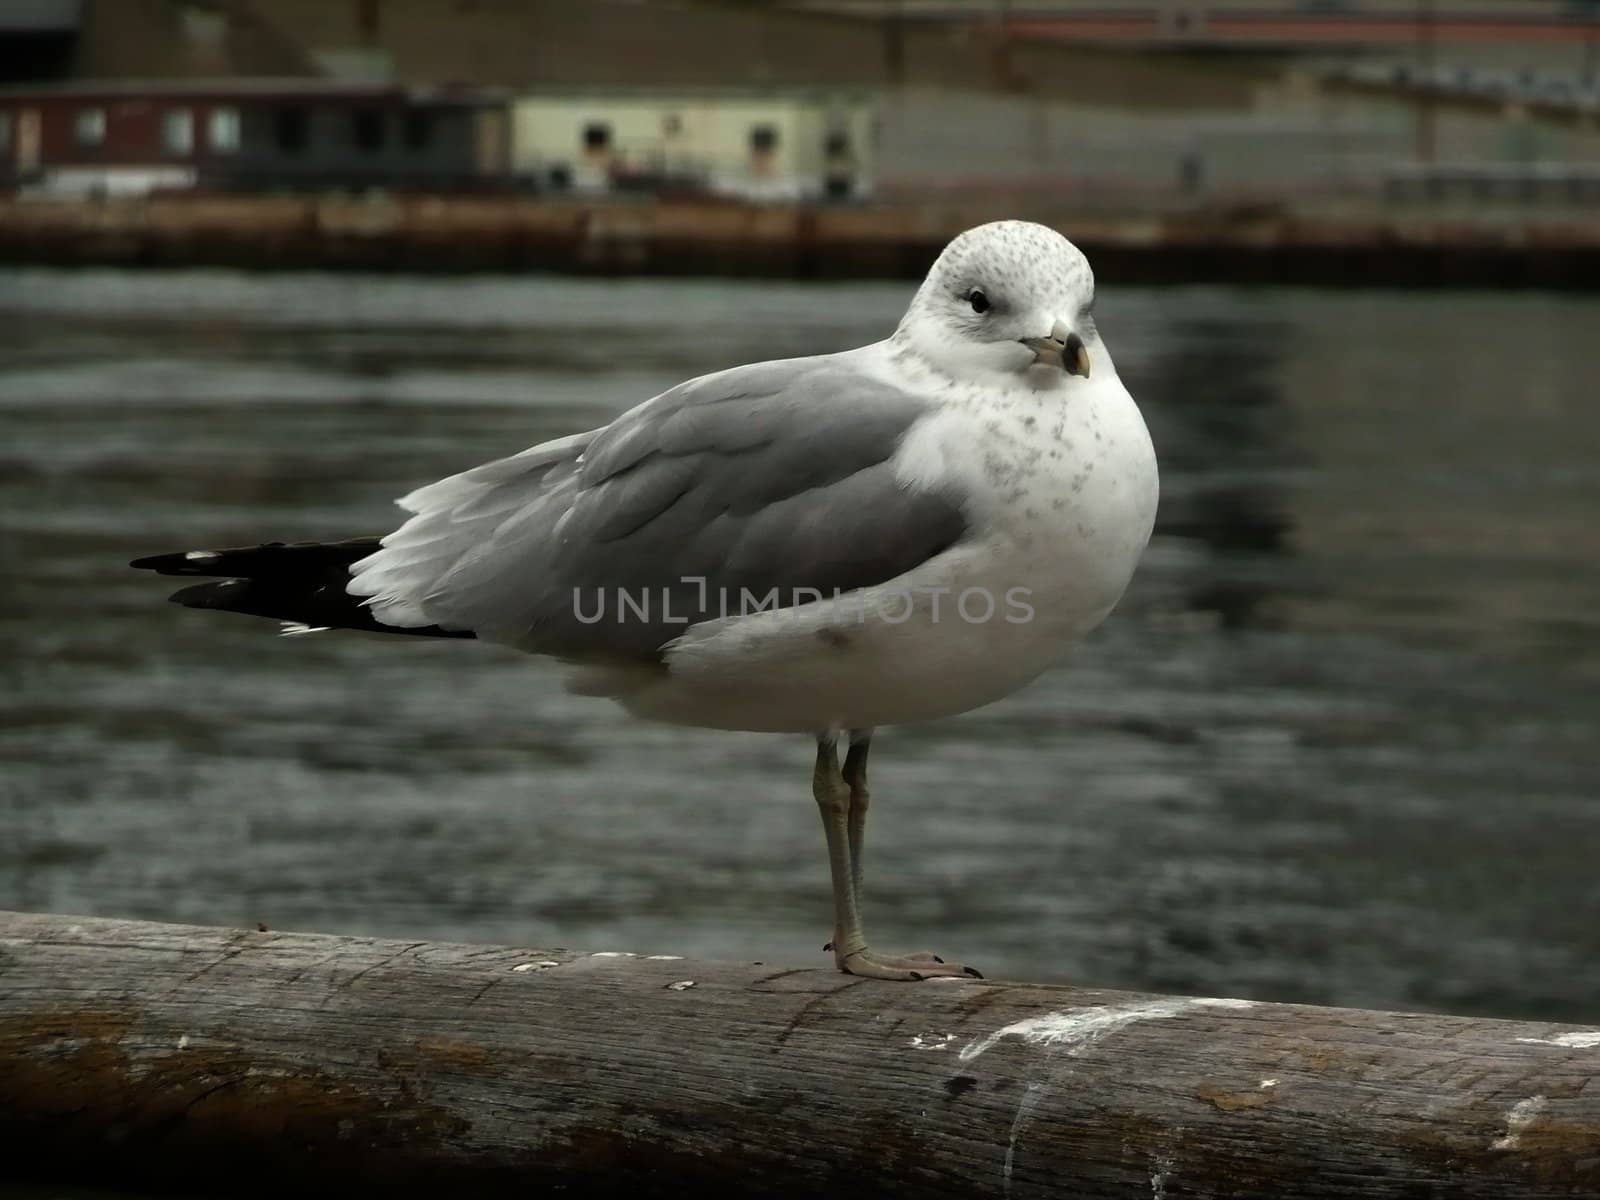 Close-up of a Seagull over the Hudson River, New York, USA